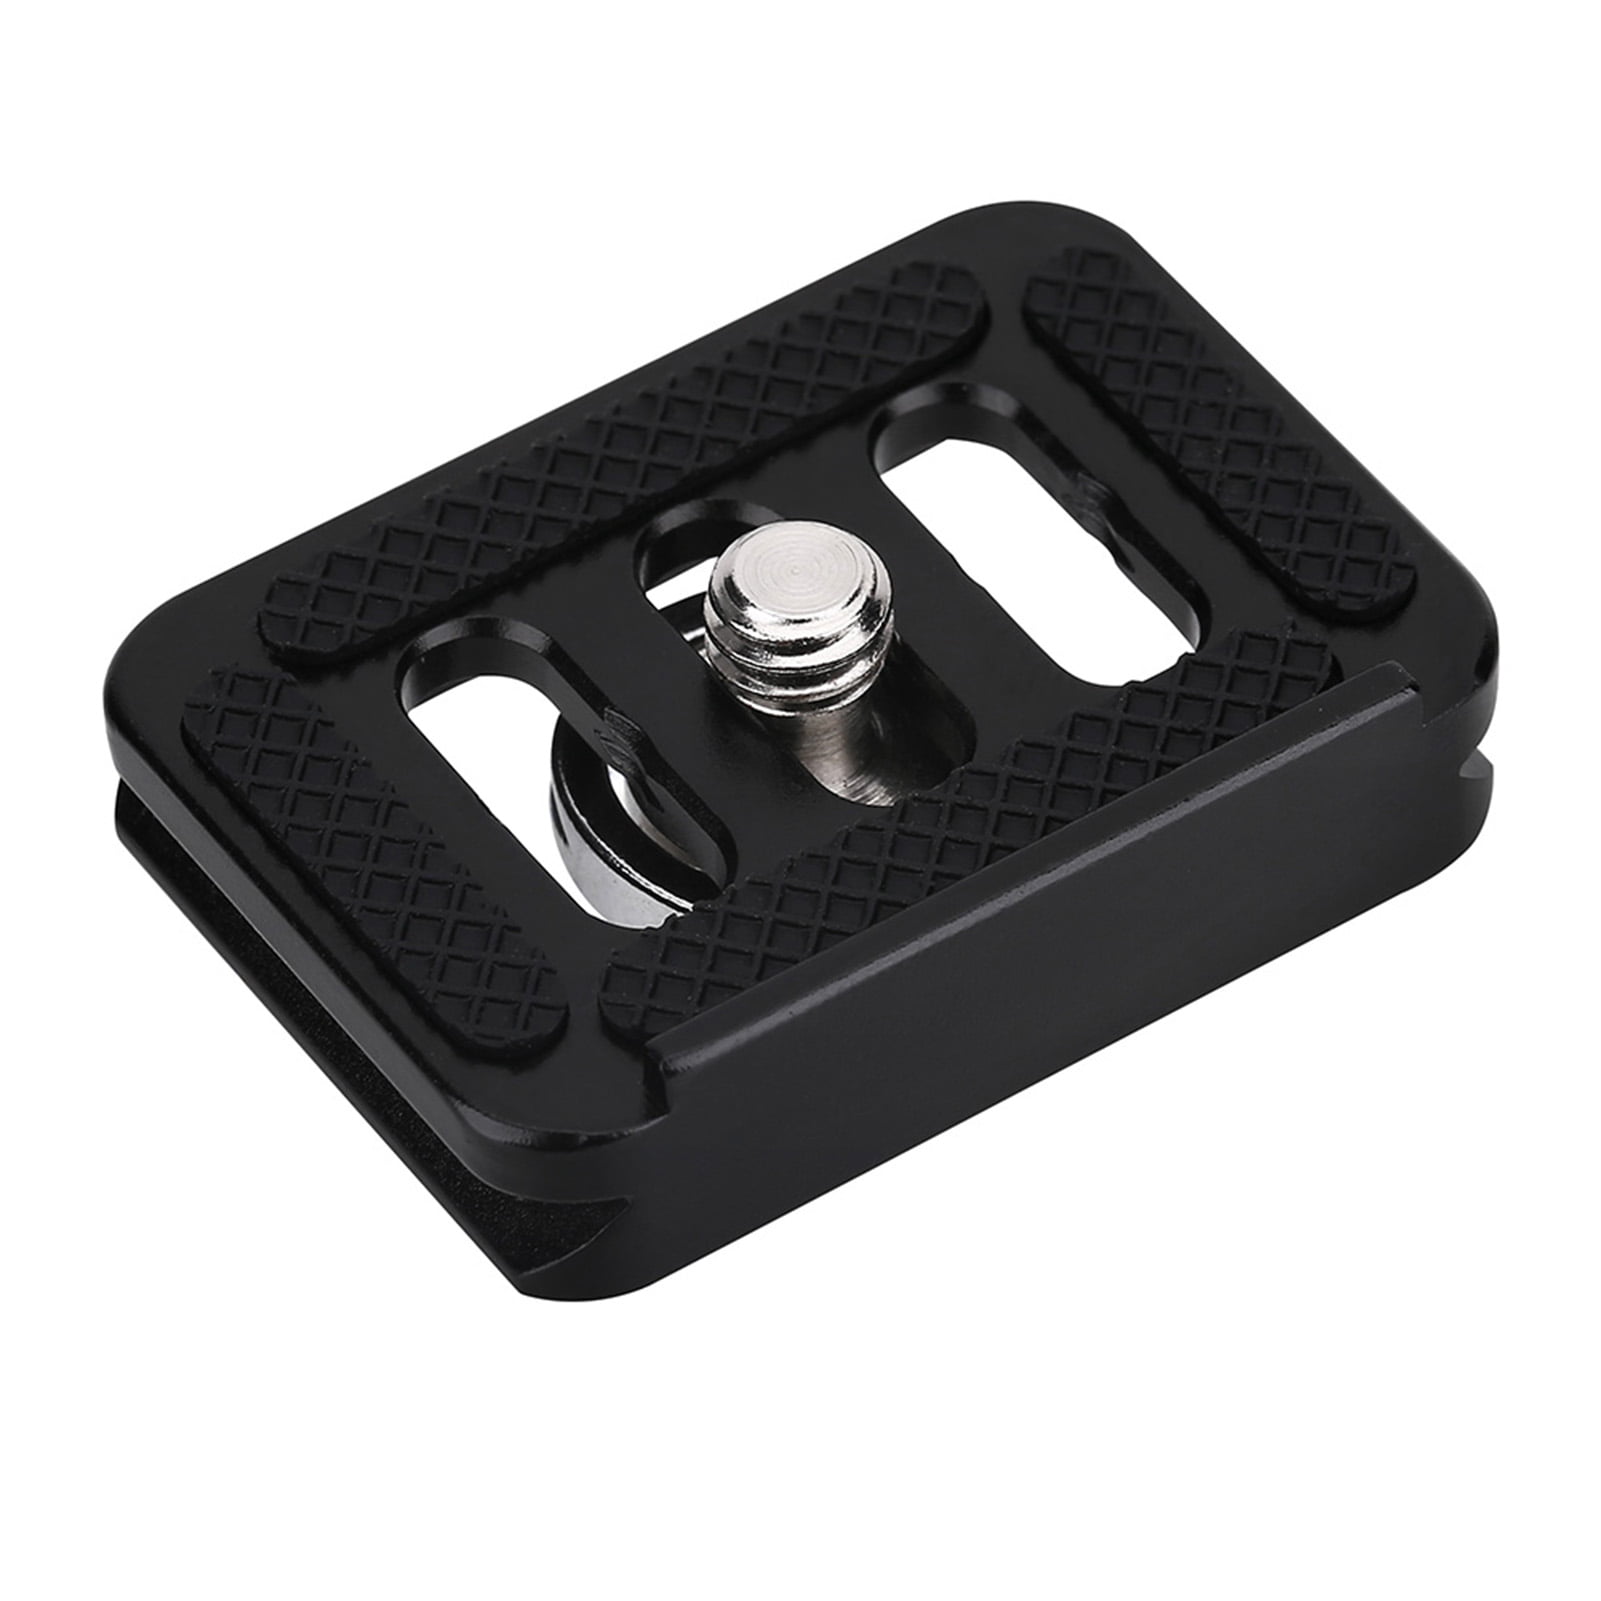 MENGS TY-C10 Quick Release Plate With Aluminum Alloy Material For Mirrorless Camera Telephoto Lens